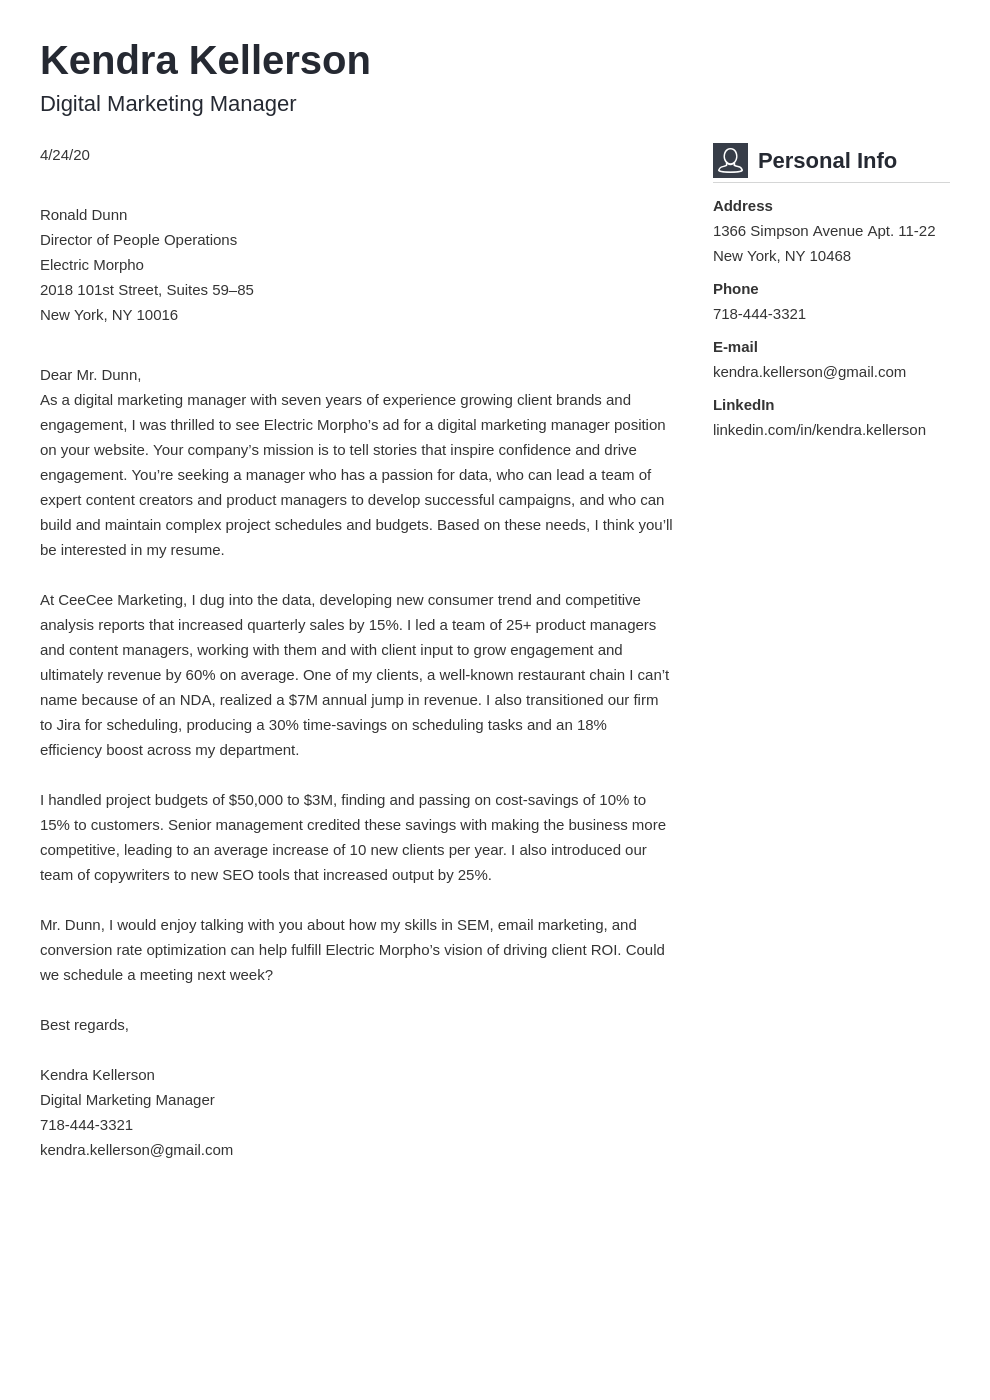 Sample Cover Letter Content - Knowing And Sharing (990 x 1400 Pixel)